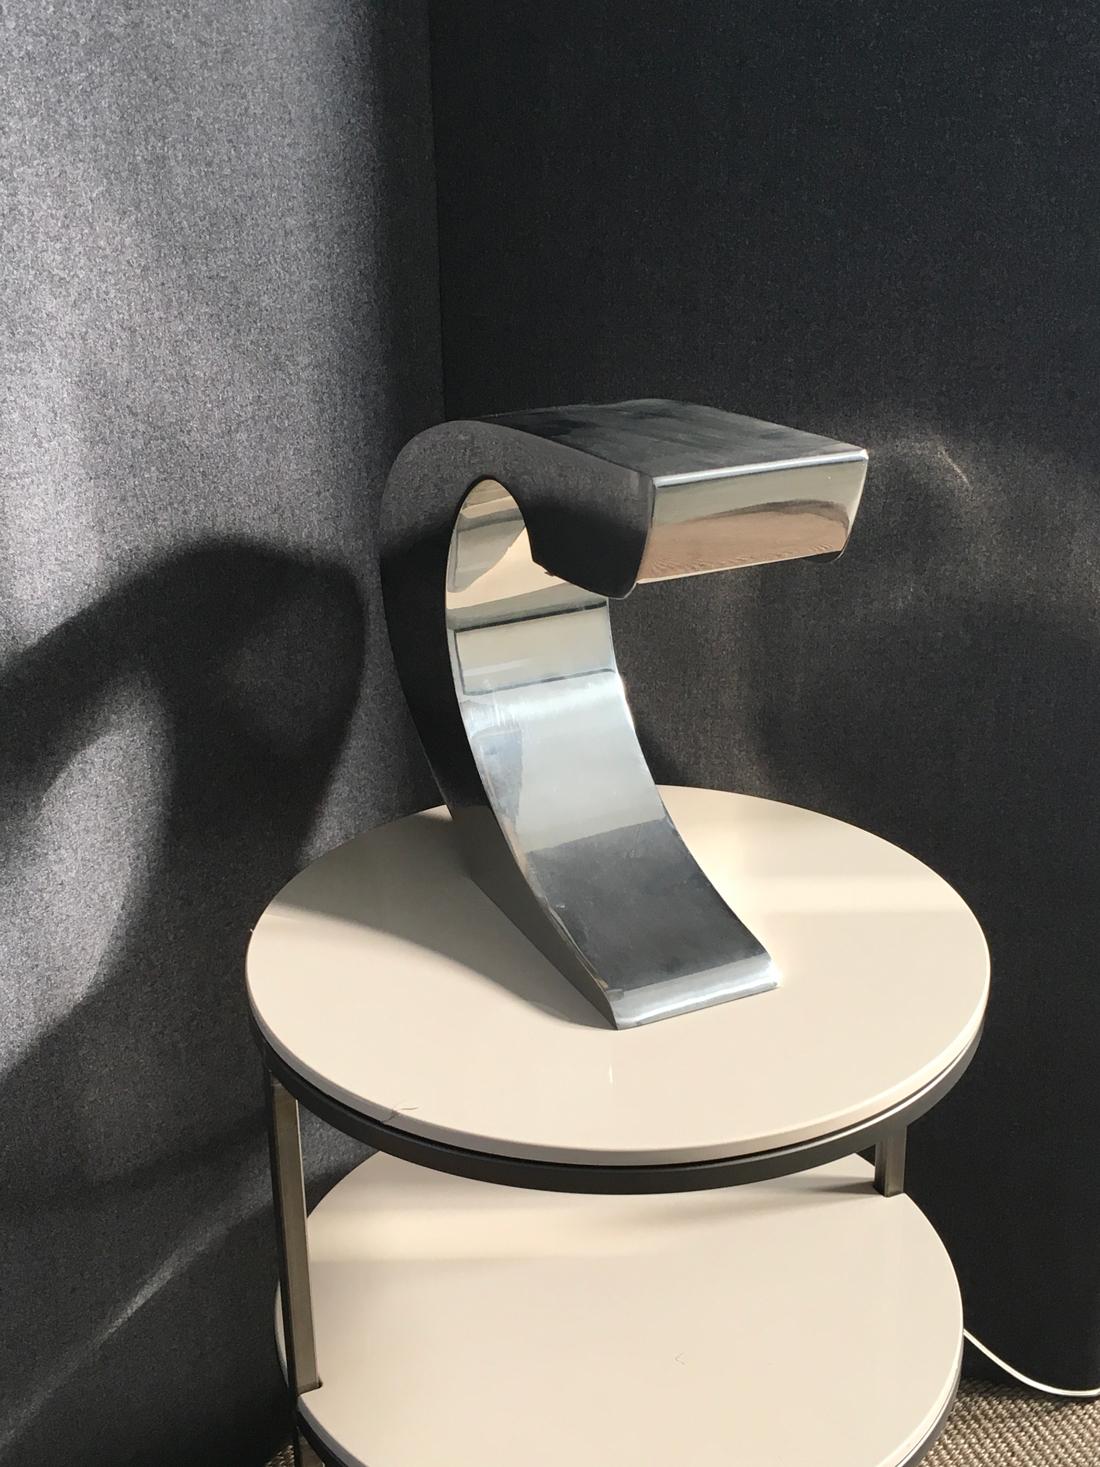 Hand-Crafted Post-Modern Italian Design Steel Chrome Abstract Table Lamp For Sale